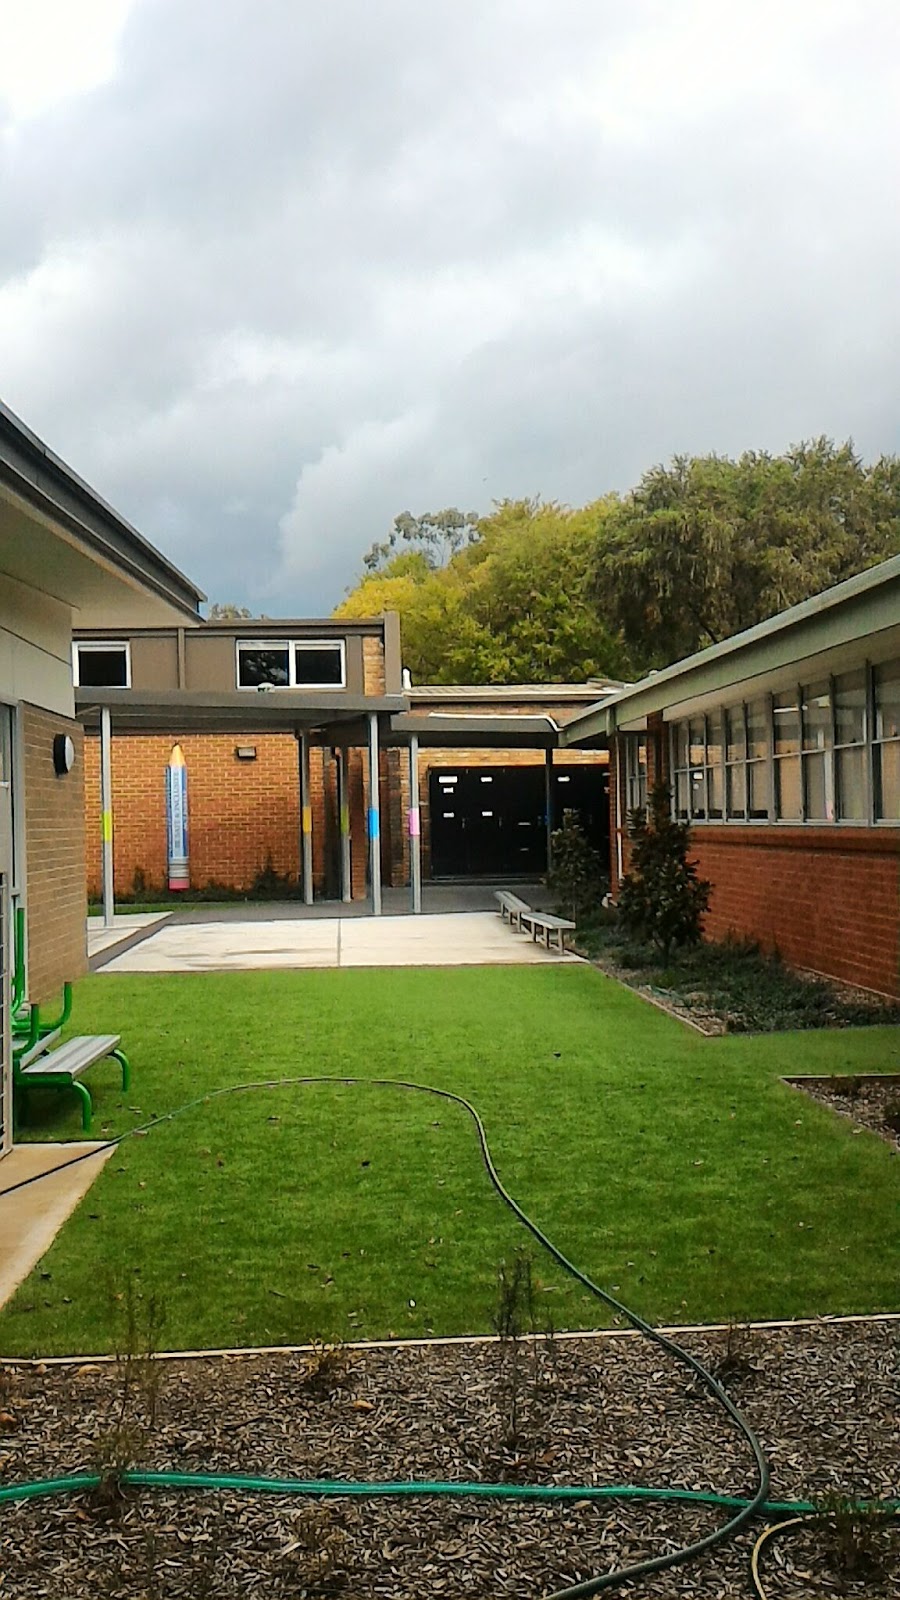 Our Lady of The Way Primary School | school | 17 Troy St, Emu Plains NSW 2750, Australia | 0247777200 OR +61 2 4777 7200